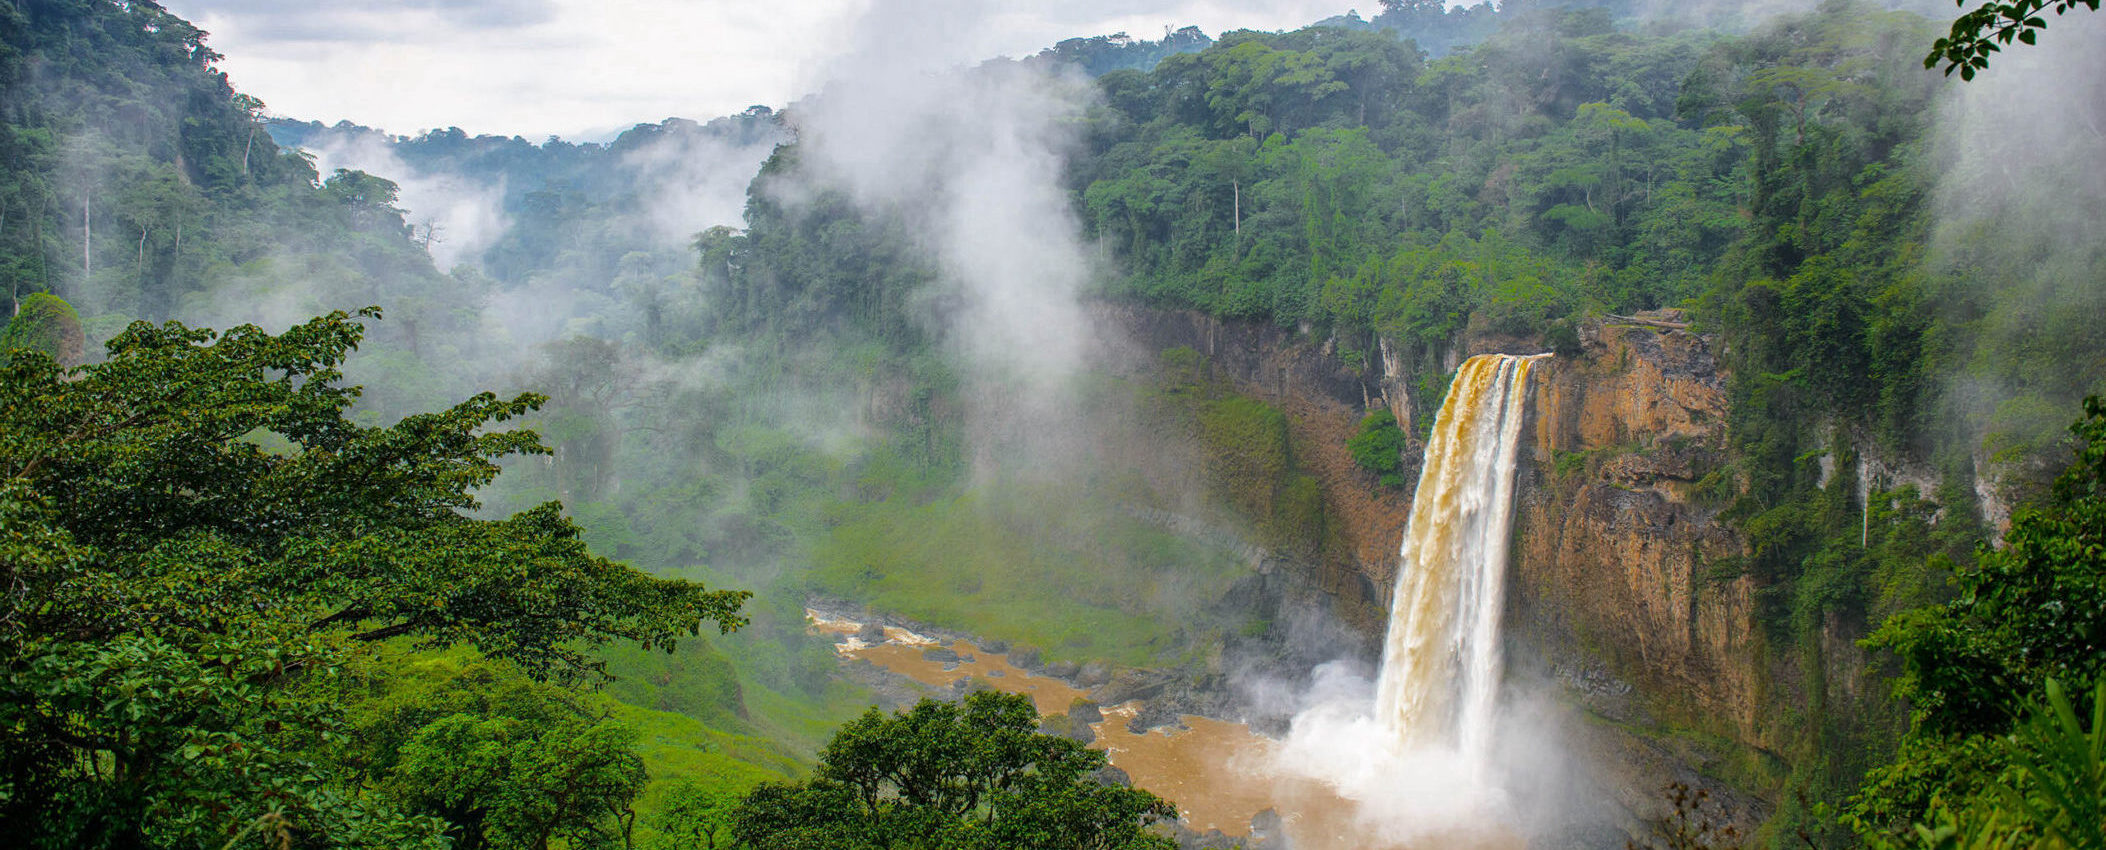 Water fall in Cameroon on a cloudy day